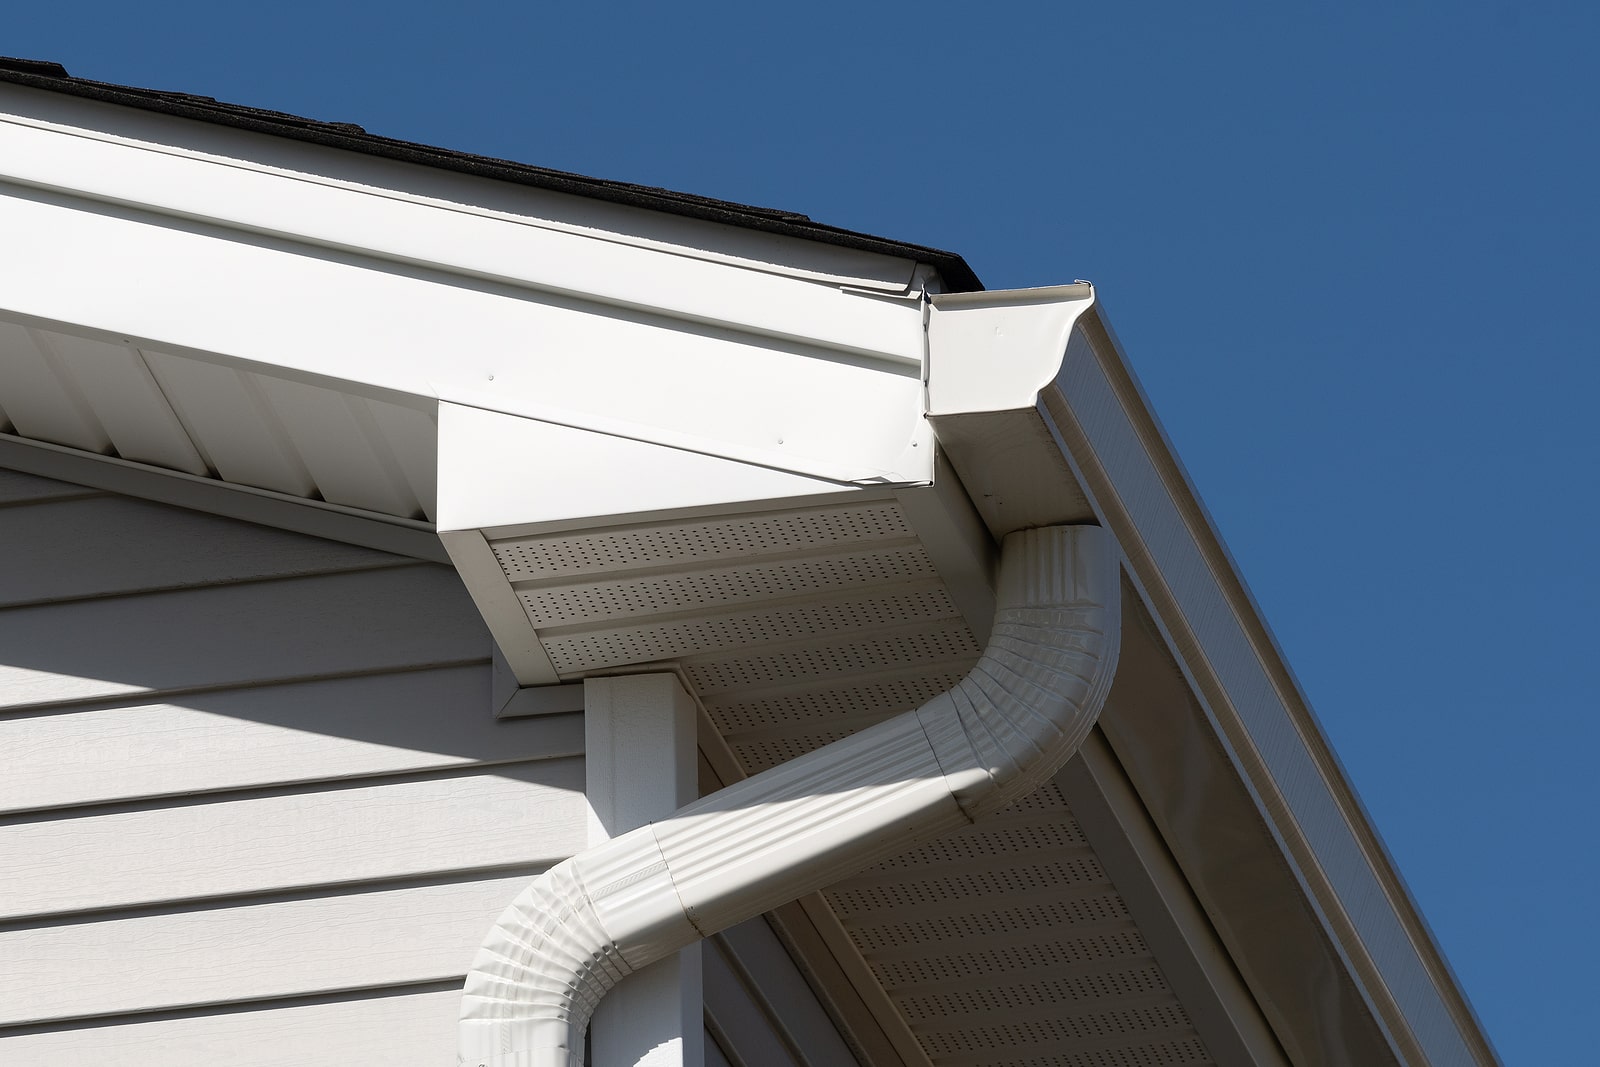 Siding and Gutter Replacement in Loganville, GA